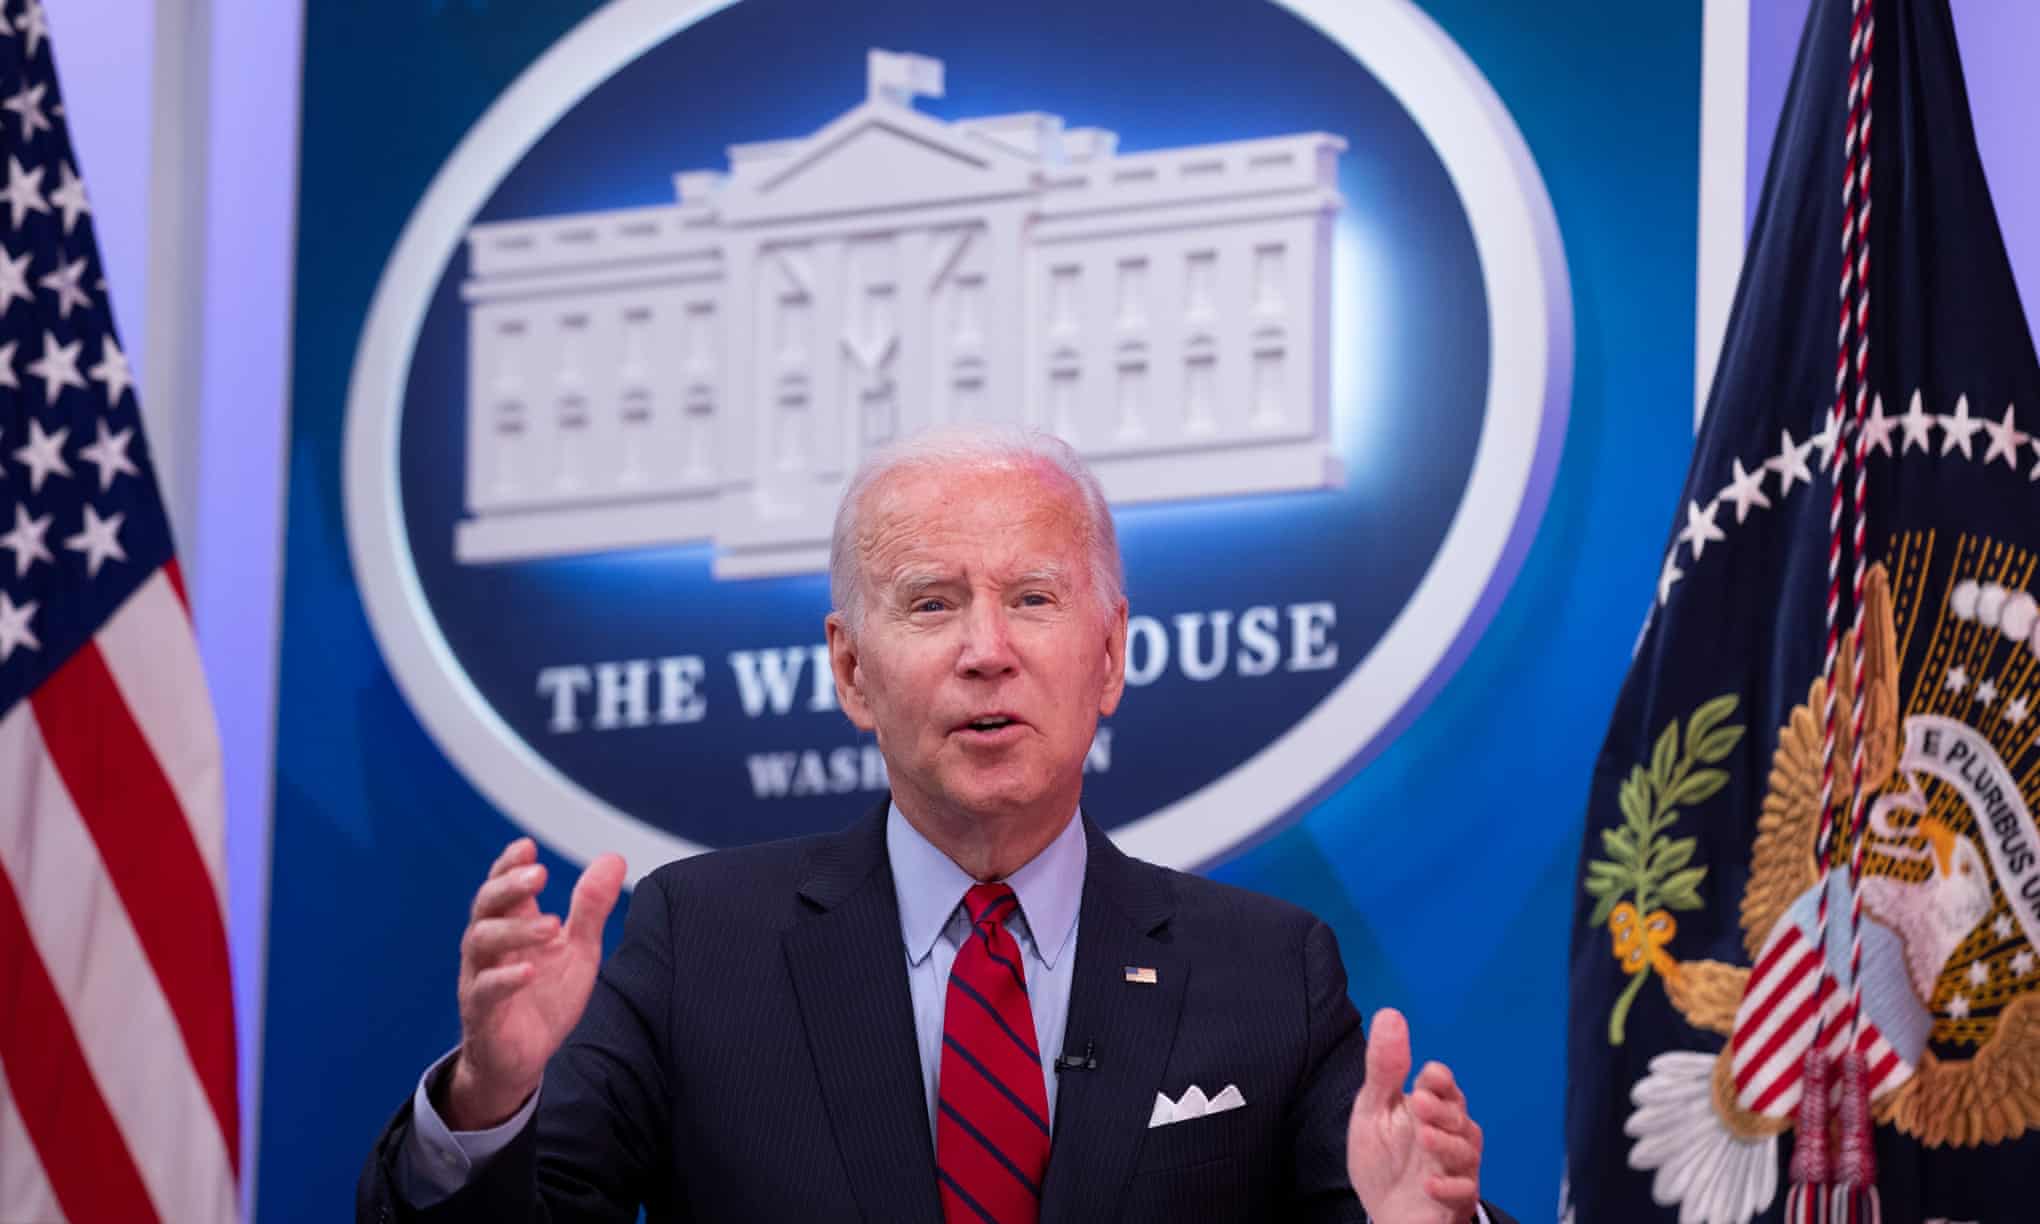 Biden urged to do more to defend abortion rights: ‘This is a five-alarm fire’ (theguardian.com)